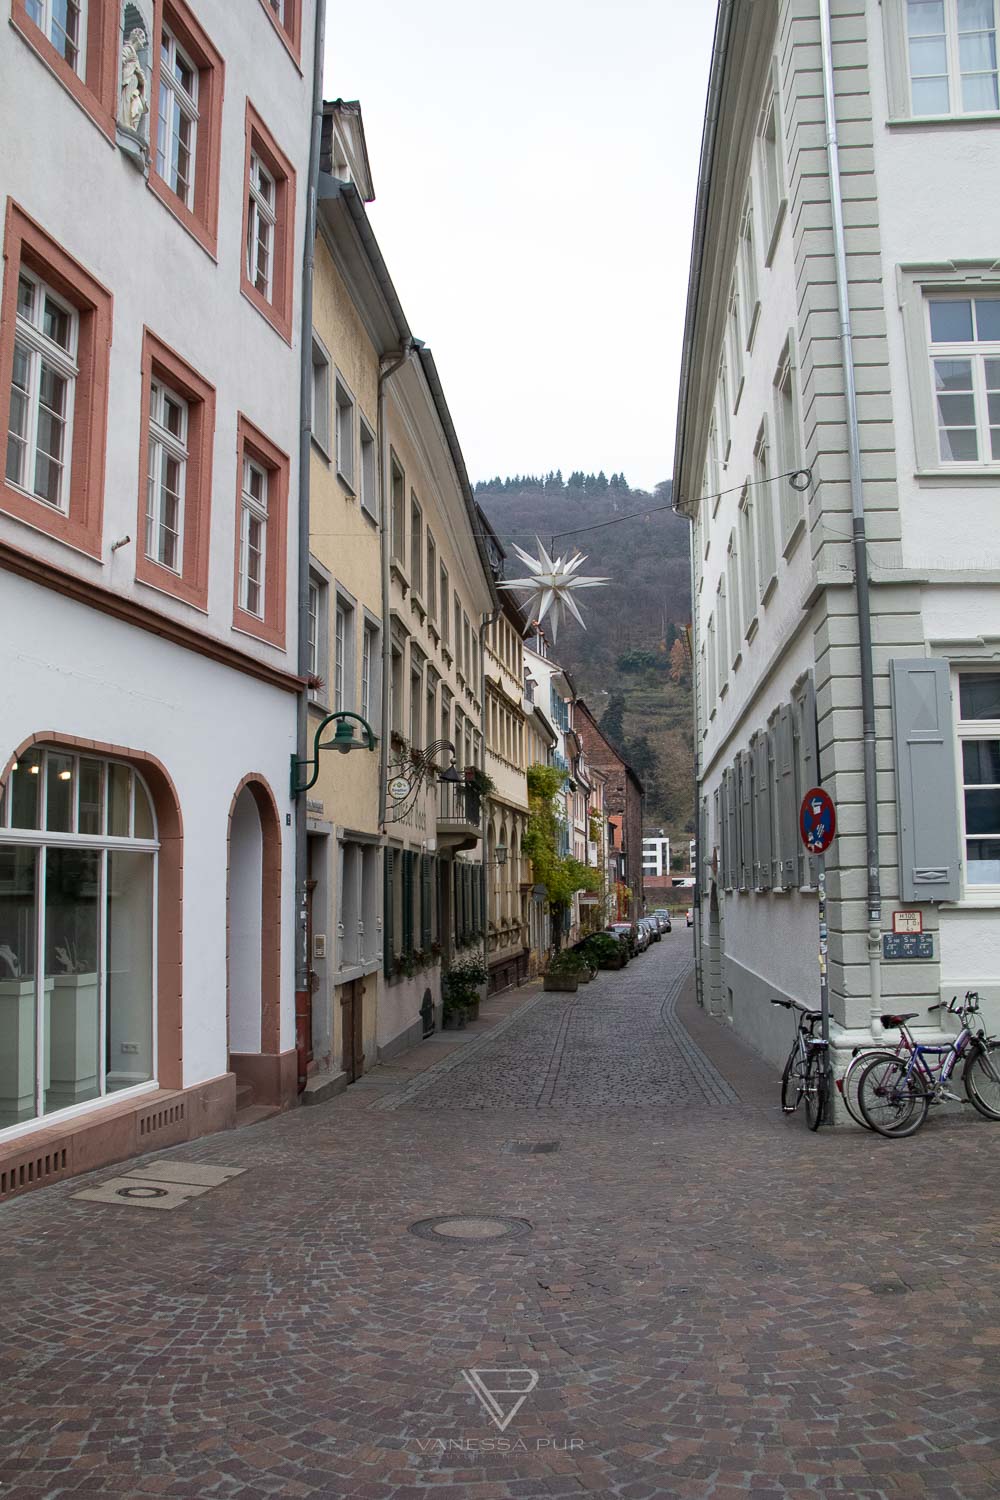 Heidelberg sightseeing top 10 - tips & city tour - Heidelberg in Germany, Heidelberg sightseeing, tips & city tour. 24 hours in Heidelberg, first visit, river, impression,